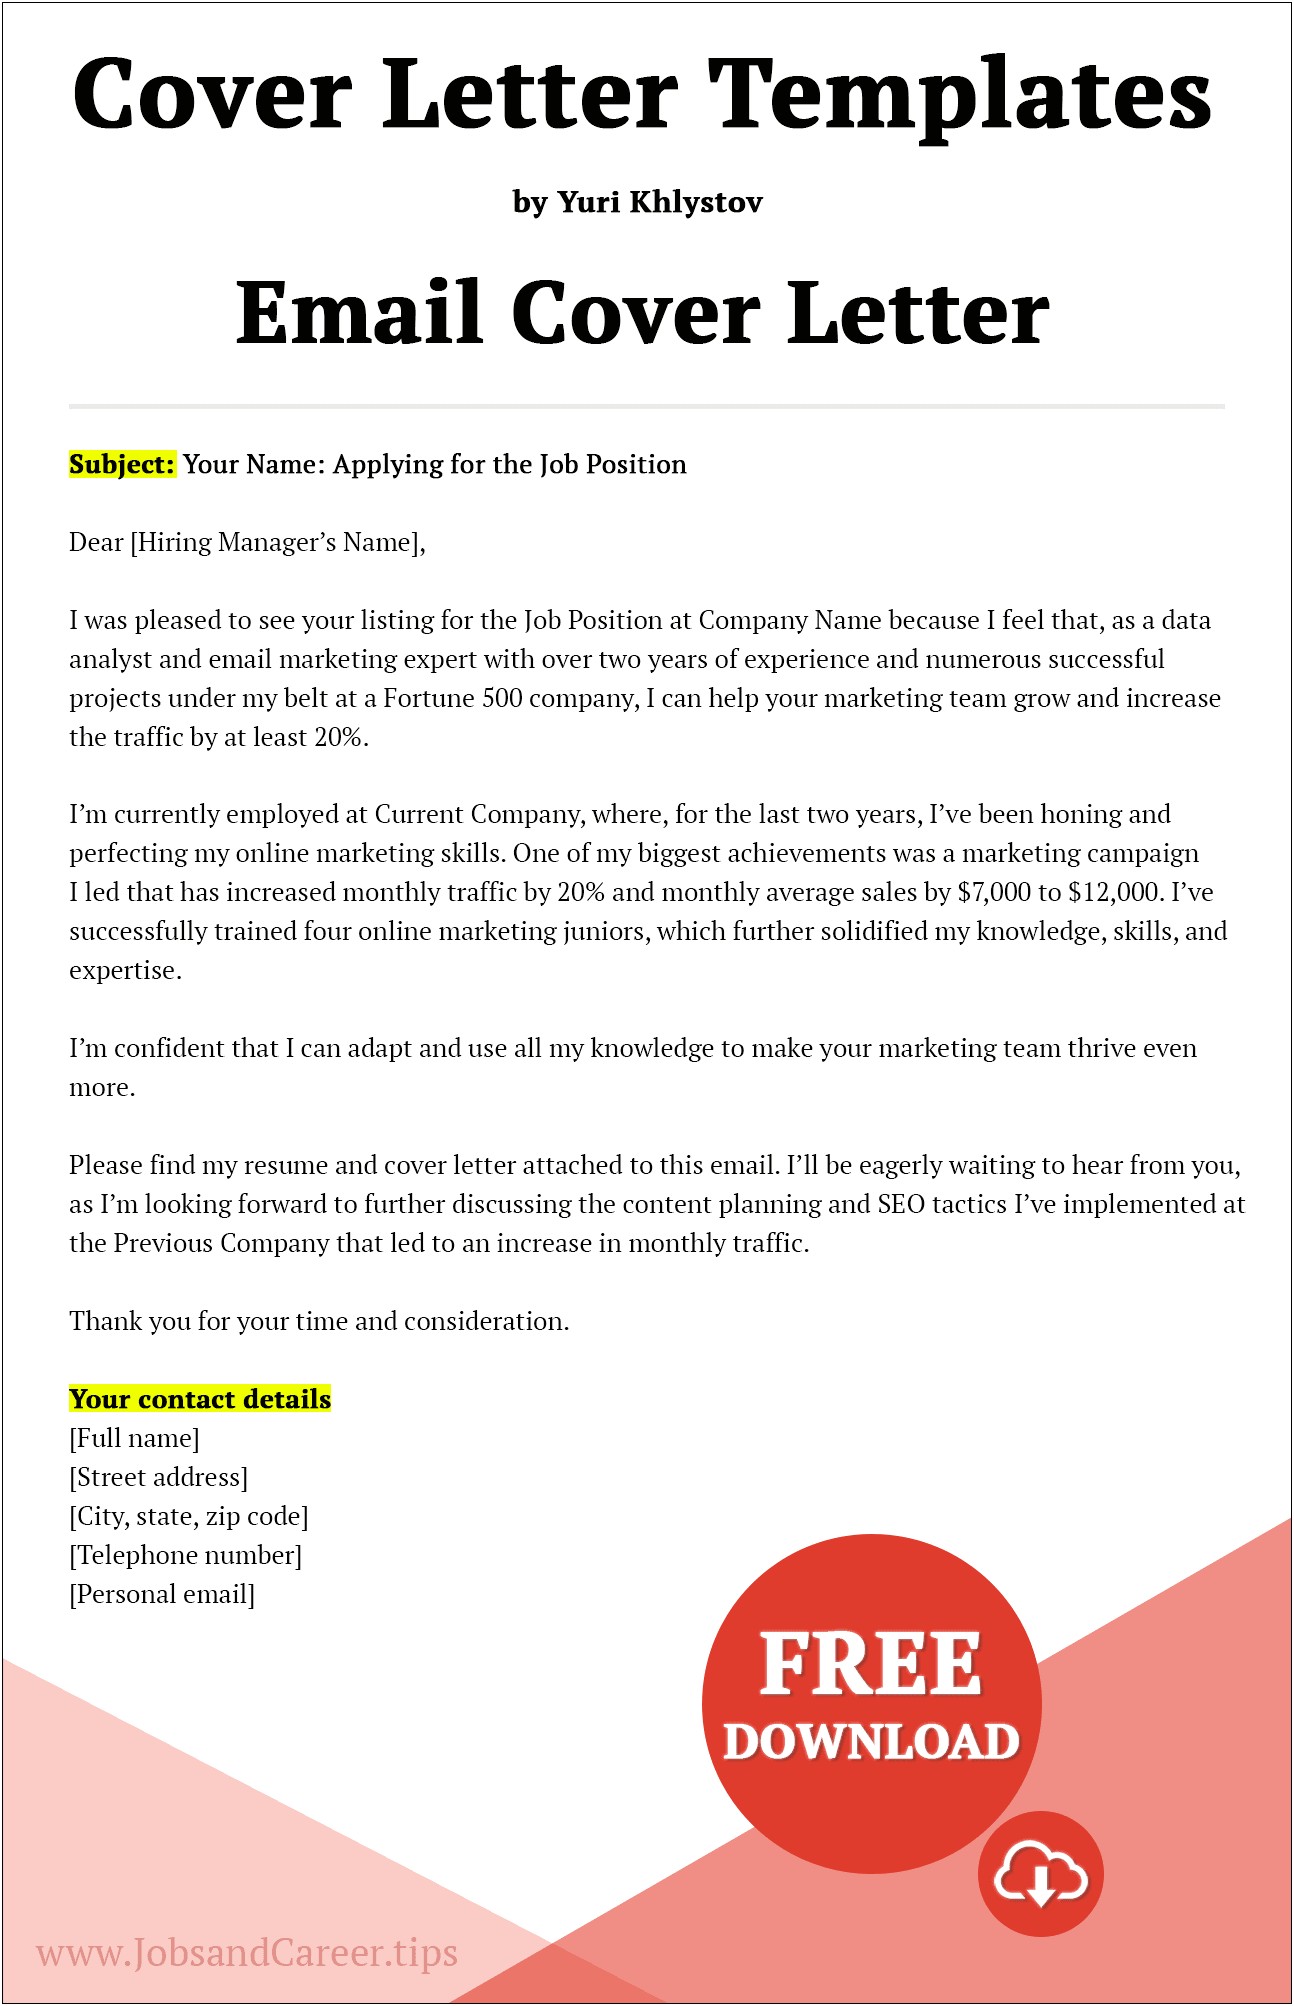 Job Application Cover Letter Template Download